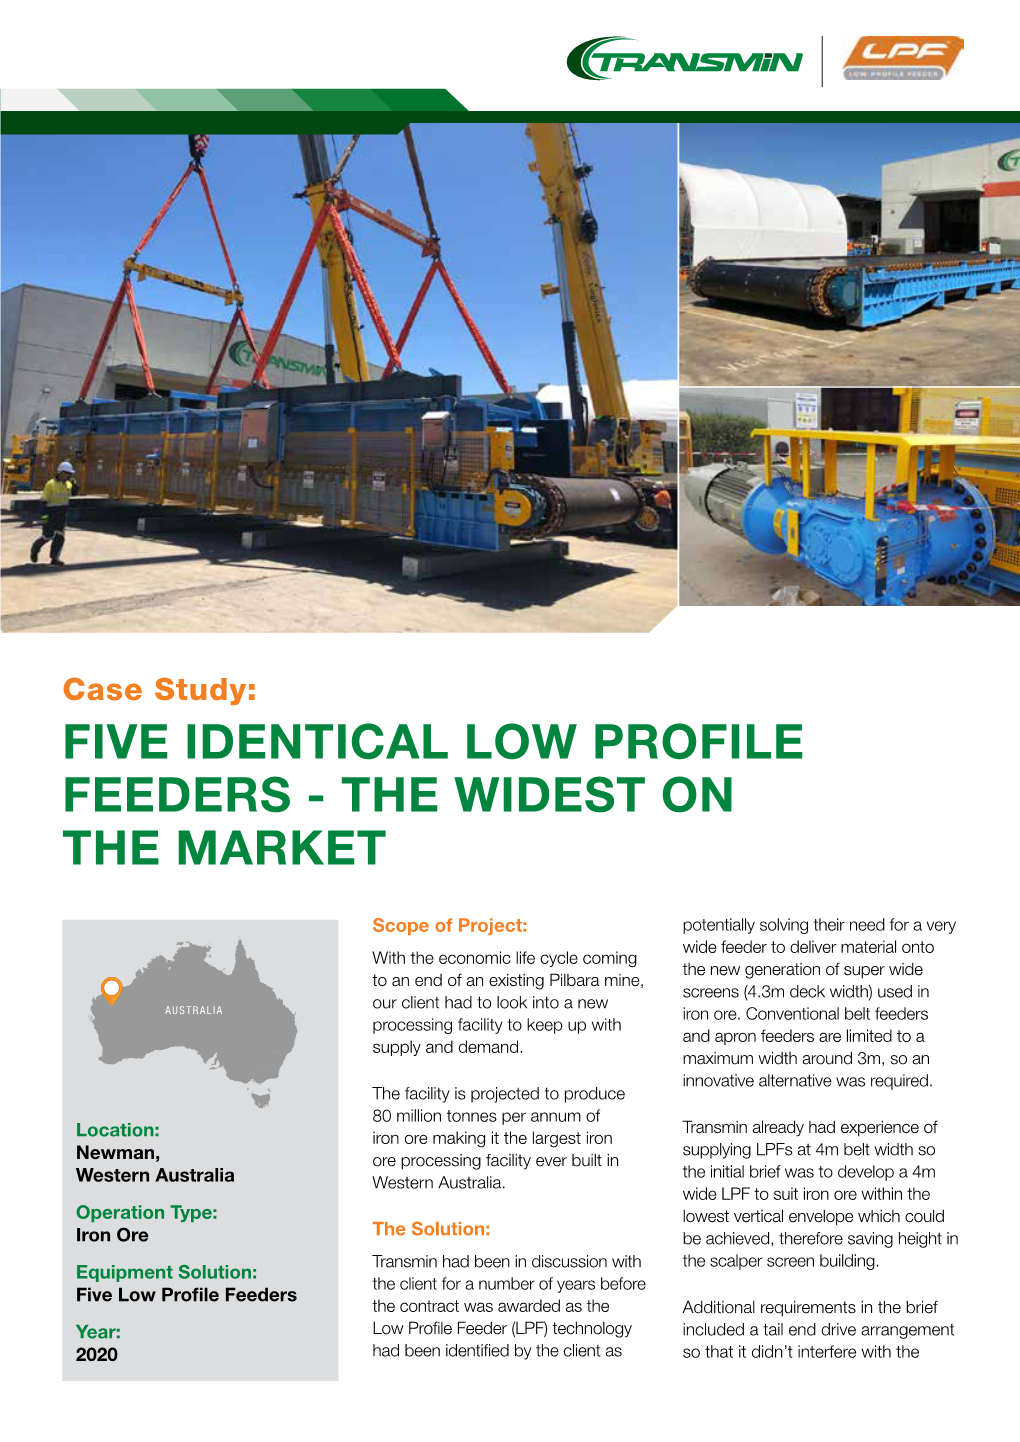 Five Identical Low Profile Feeders - the Widest on the Market